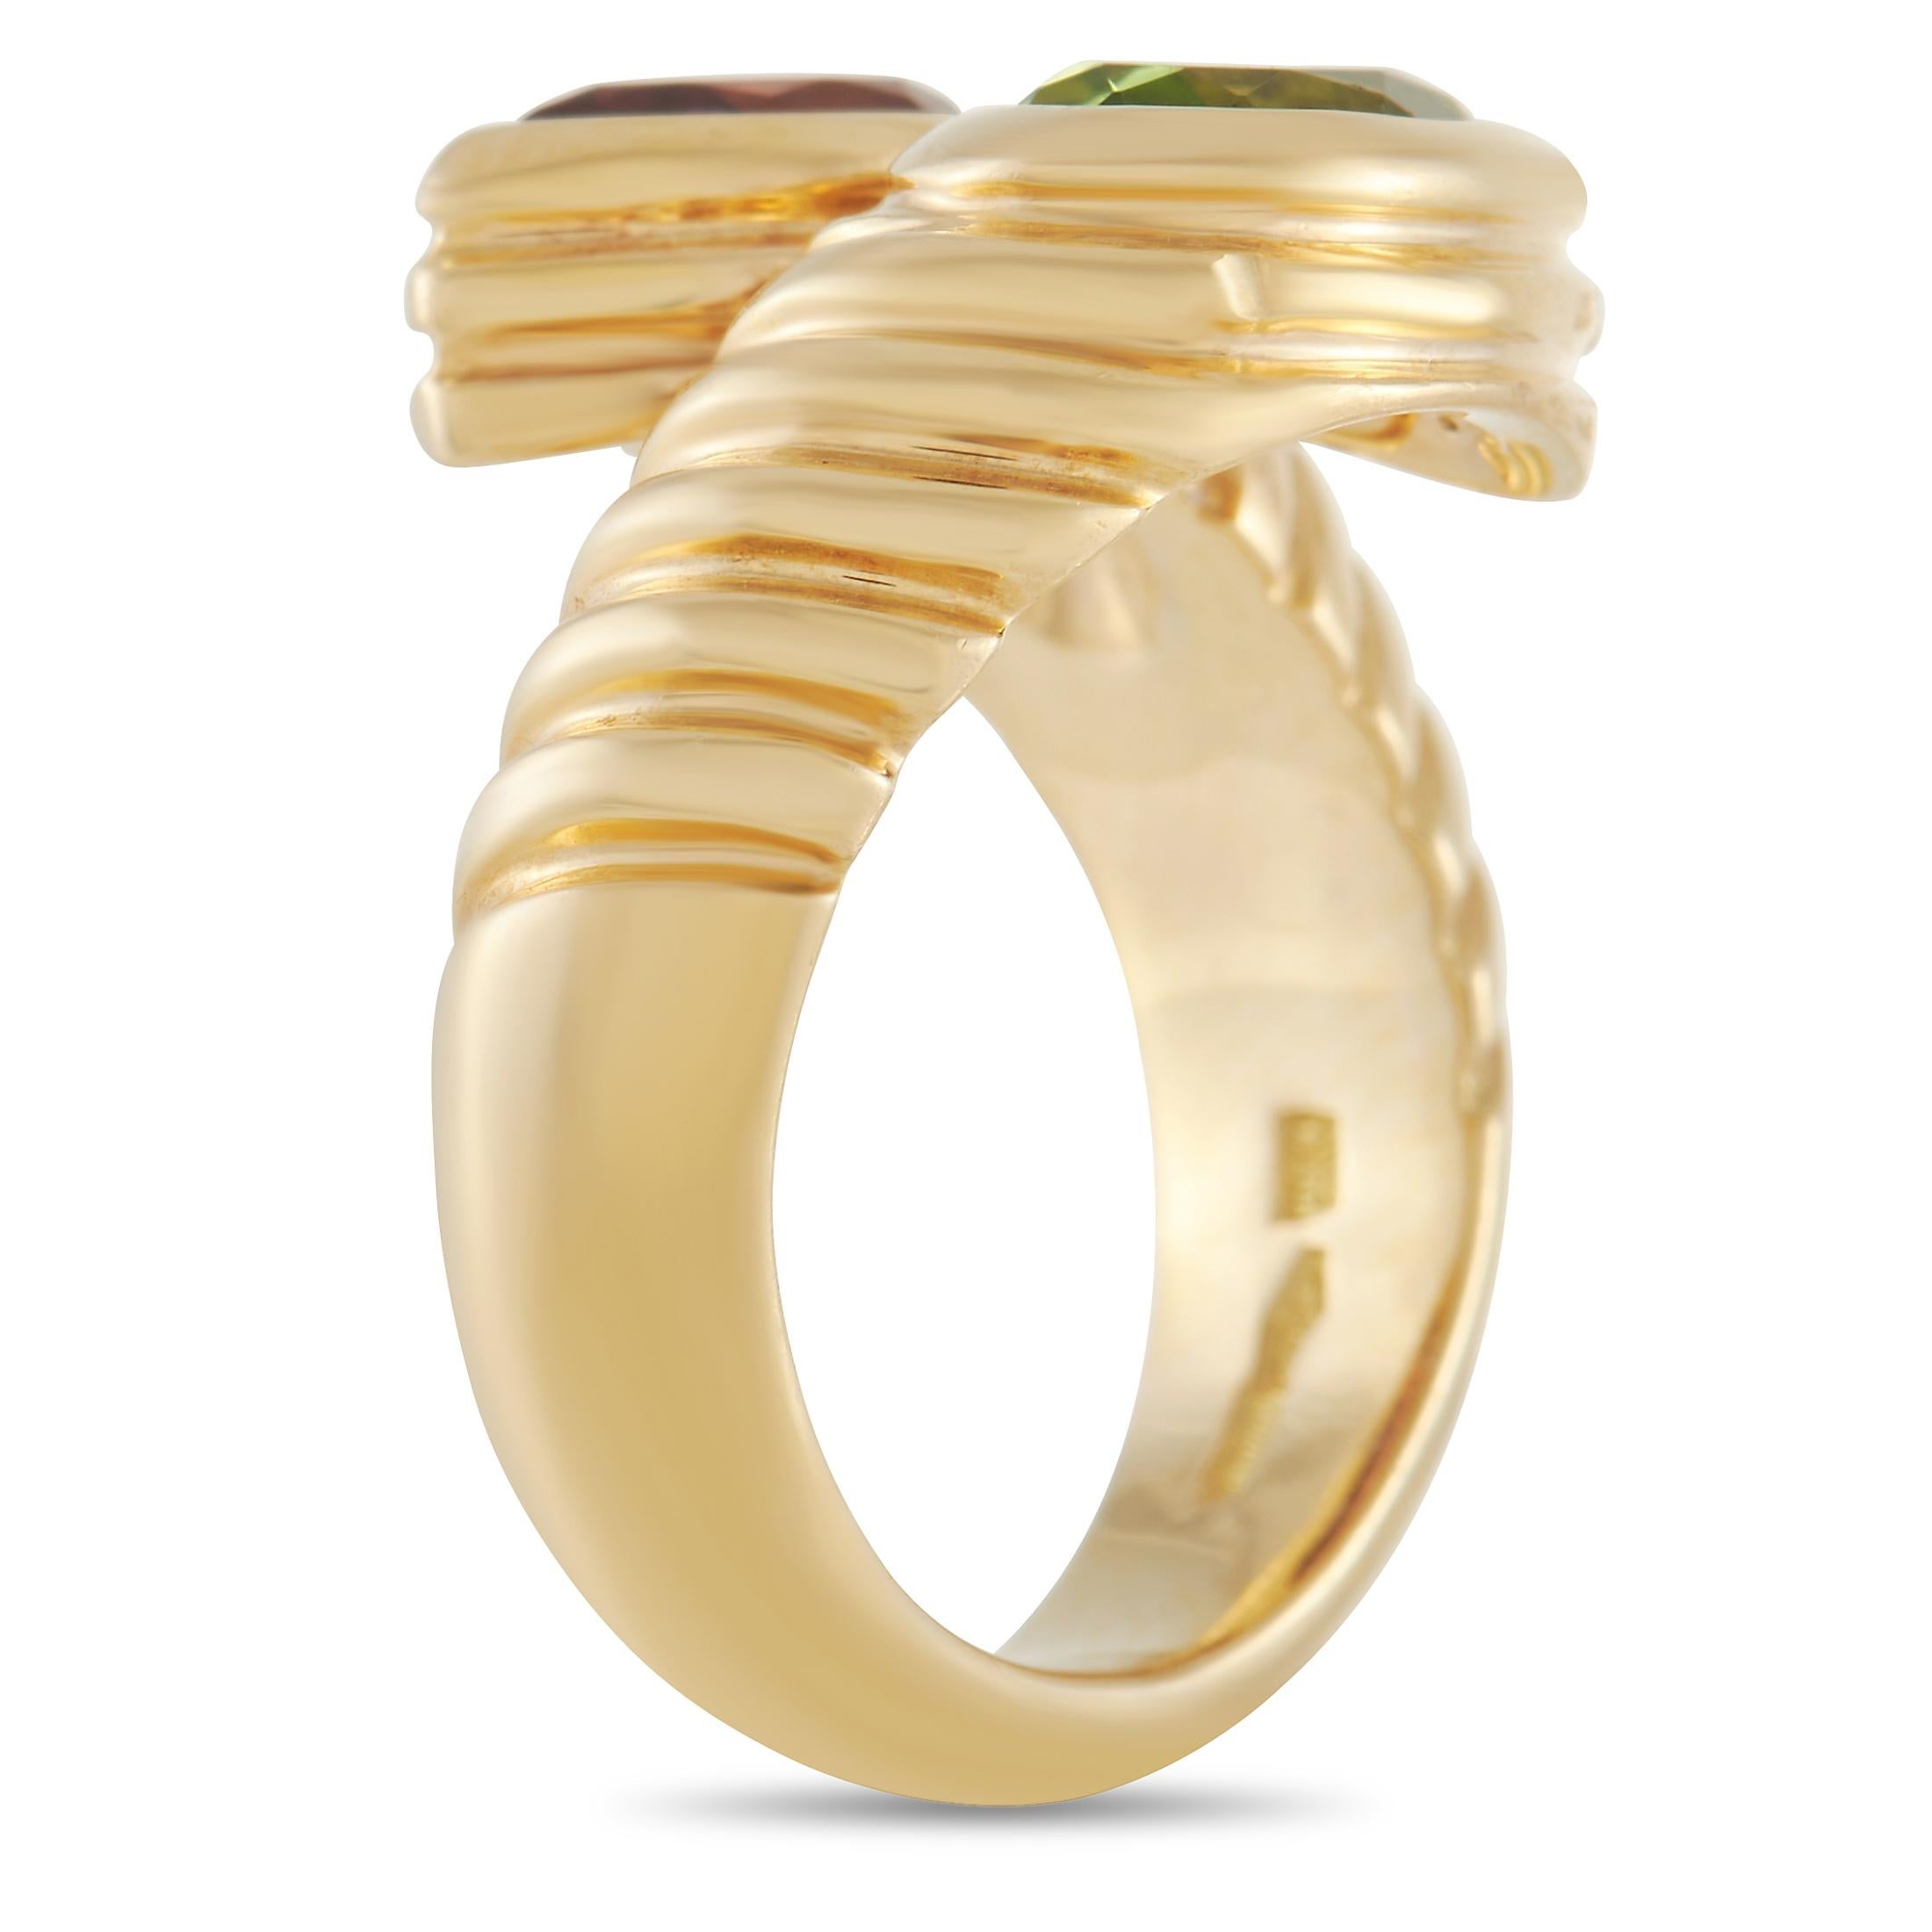 A Bvlgari ring from the 80s, this Doppio Gem-Set Ring in yellow gold is a statement-making accessory that is worthy of a spot in your collection. The bypass shank with textured detail features two faceted gems on each end. One is a green peridot and